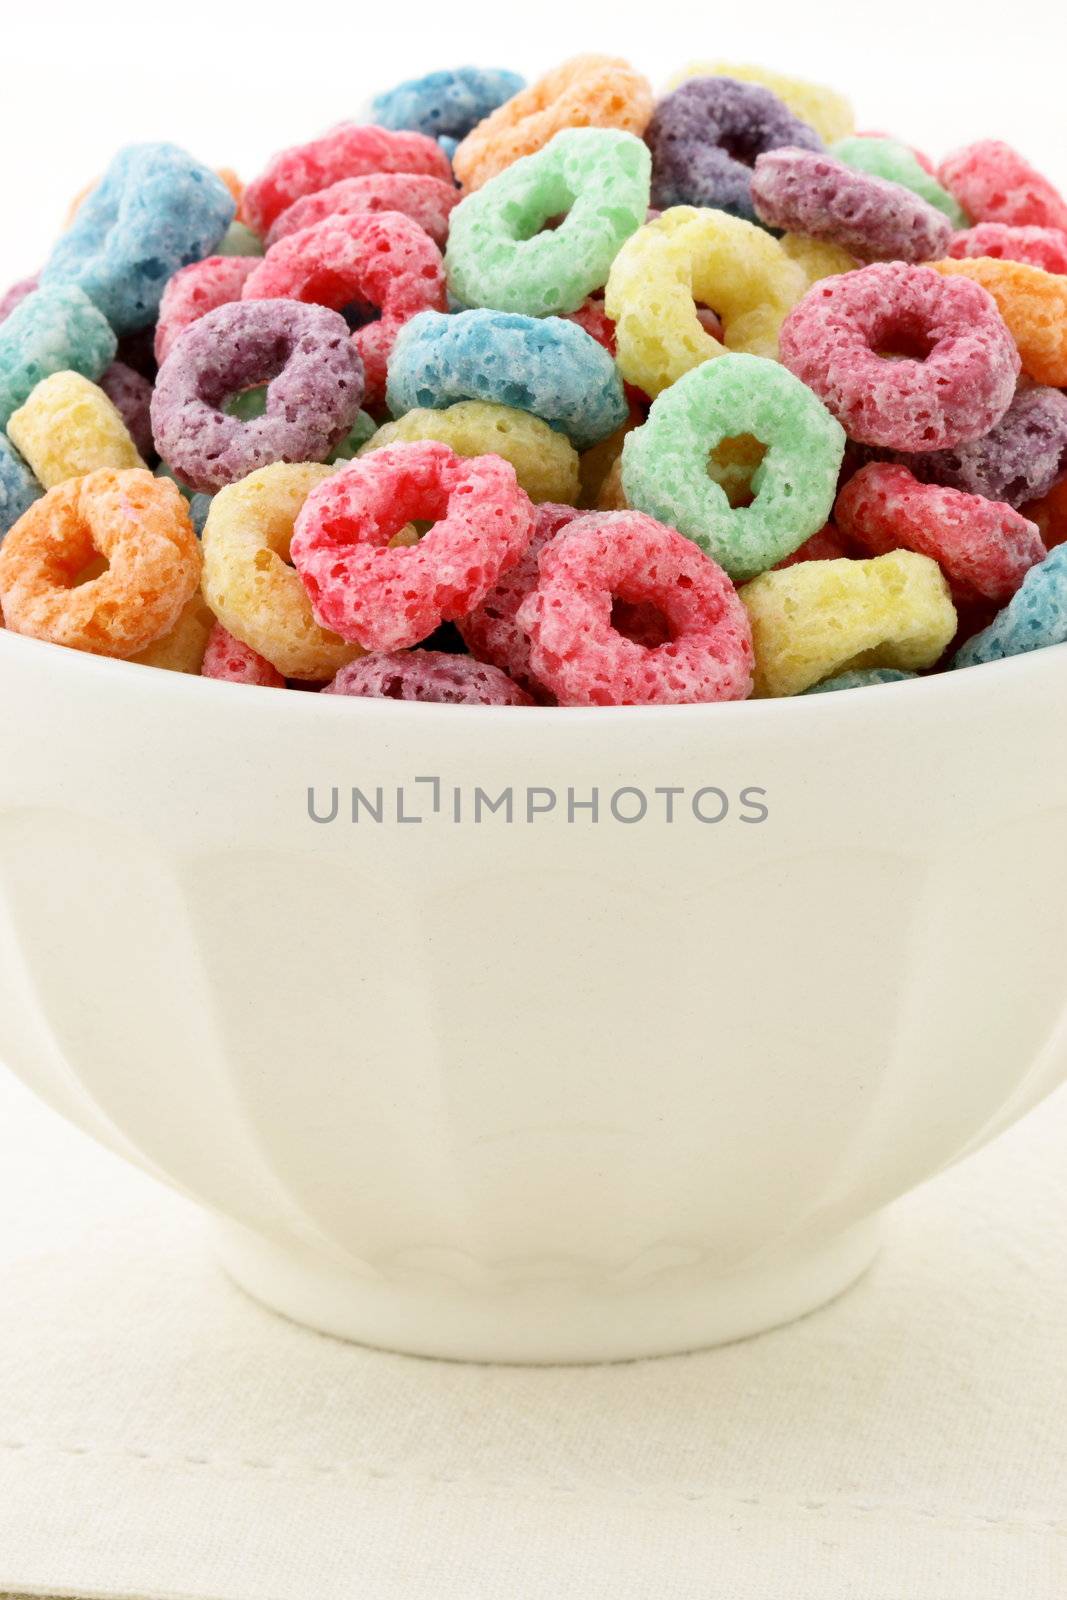 kids delicious and nutritious cereal loops or fruit cereal by tacar